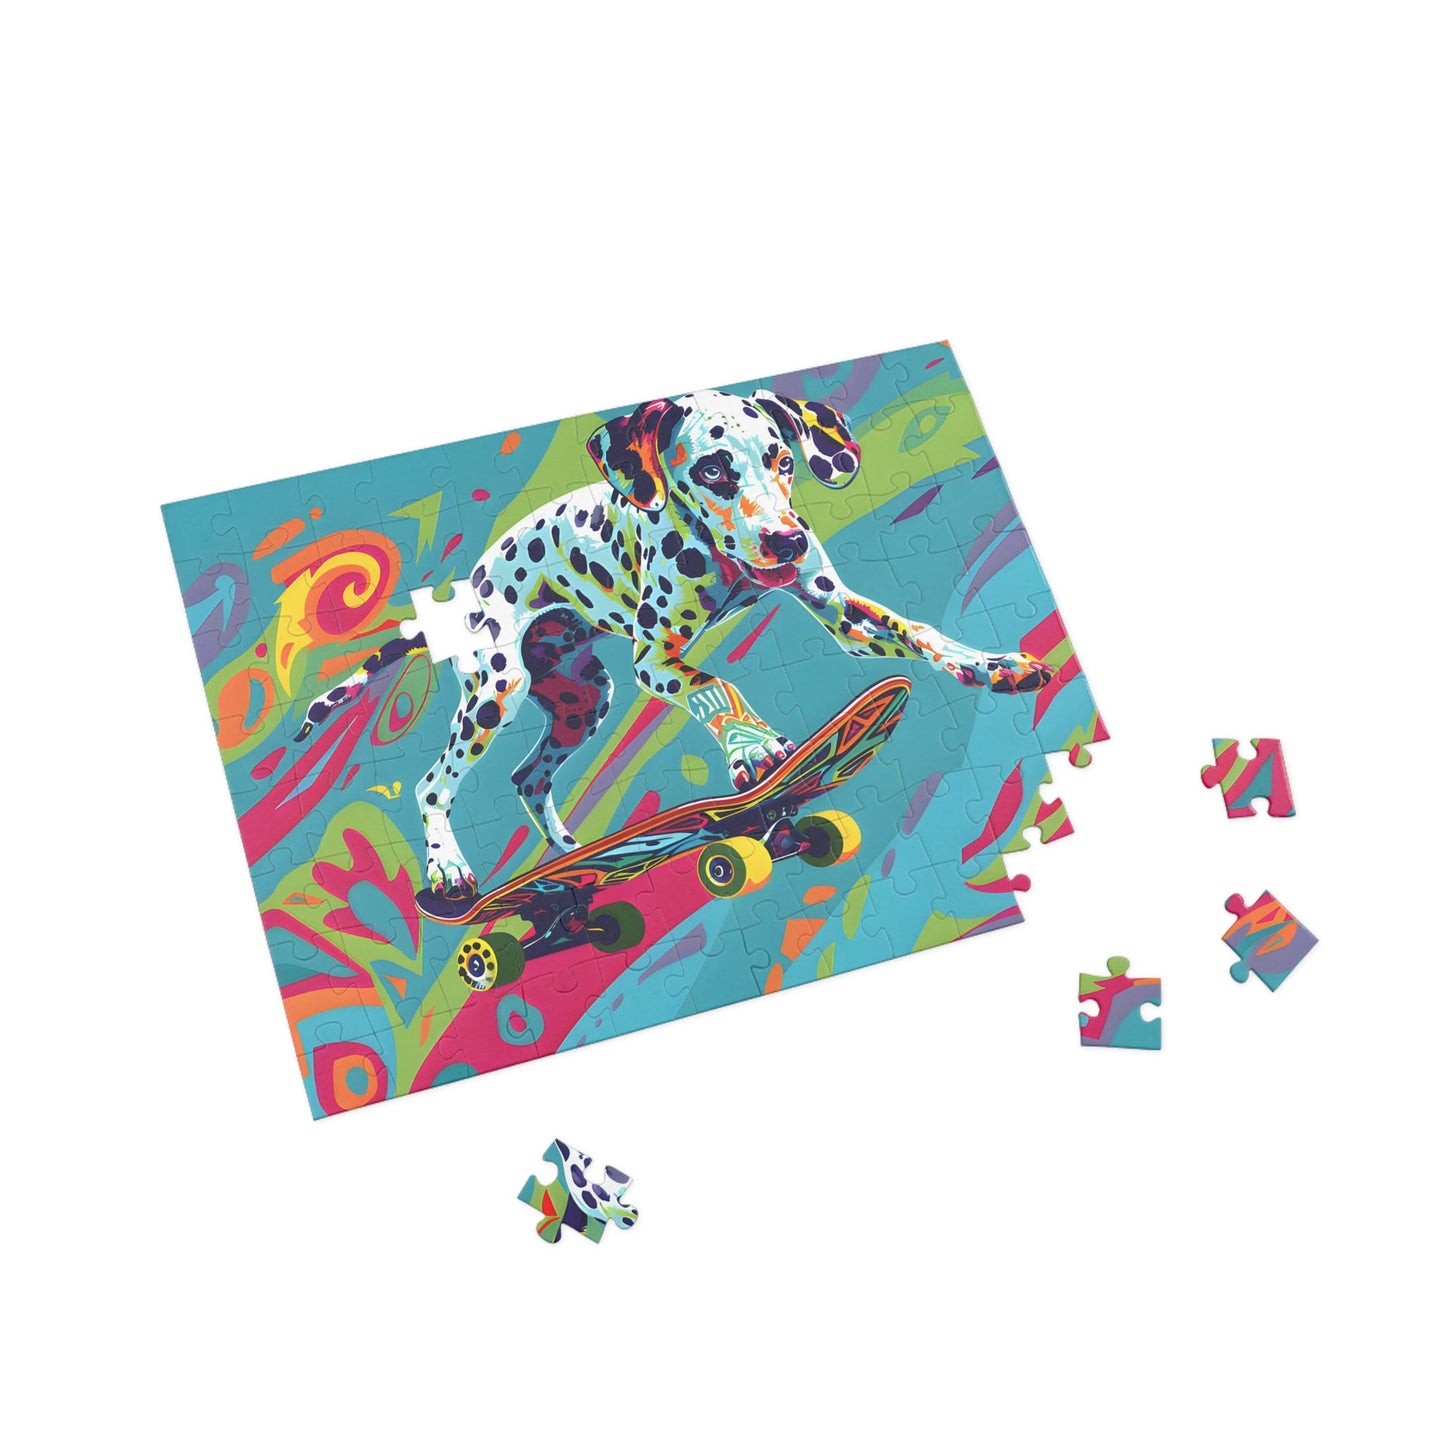 Colorful Canine Skater Jigsaw Puzzle - Puzzle - Peatsy Puzzles